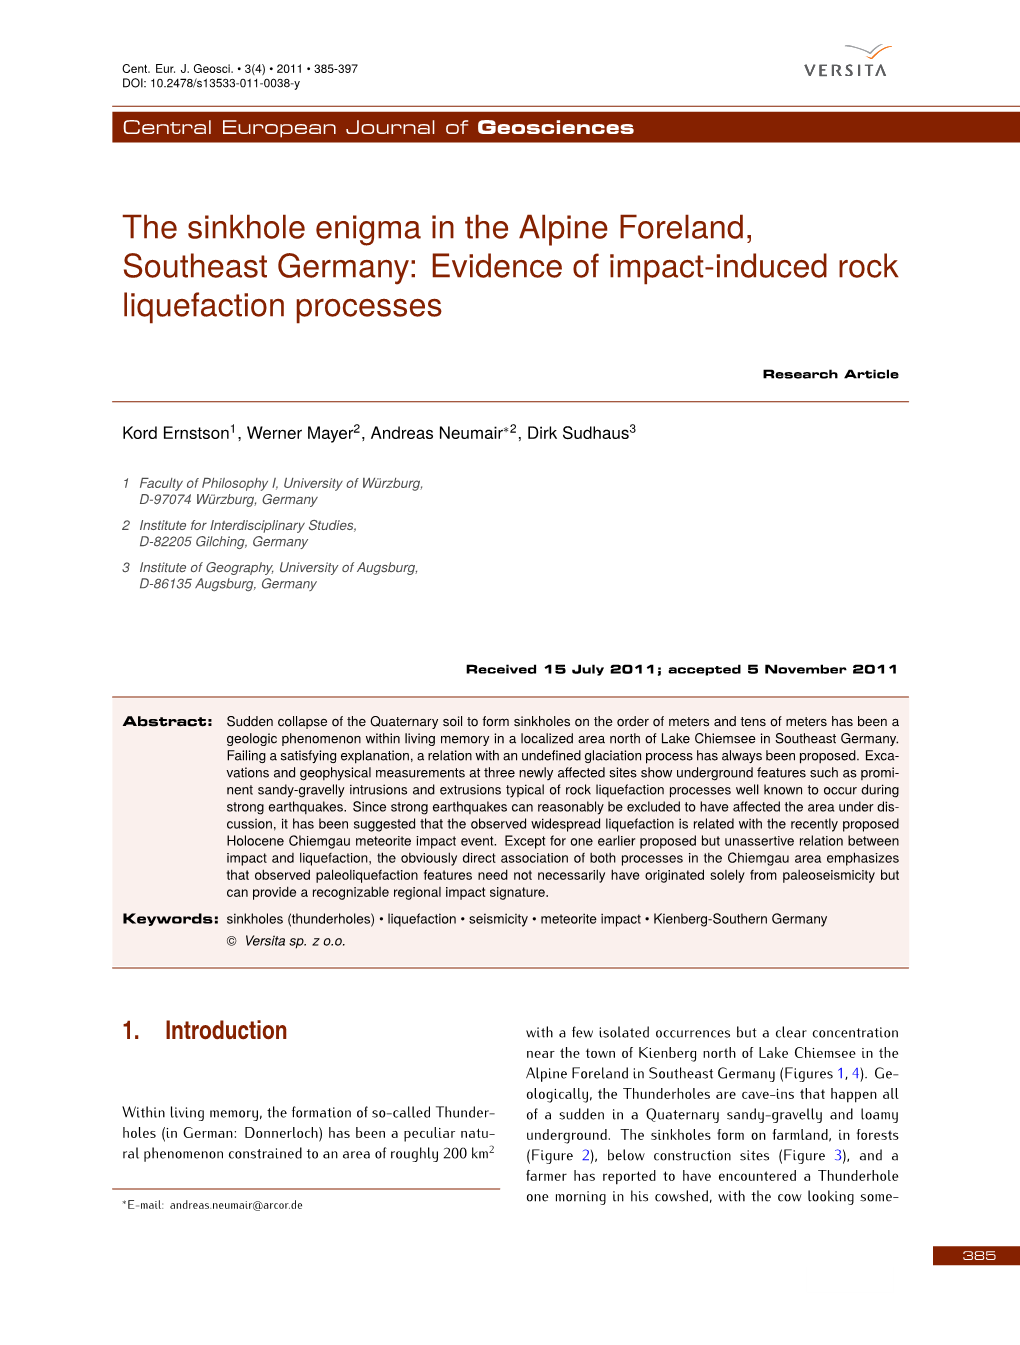 The Sinkhole Enigma in the Alpine Foreland, Southeast Germany: Evidence of Impact-Induced Rock Liquefaction Processes